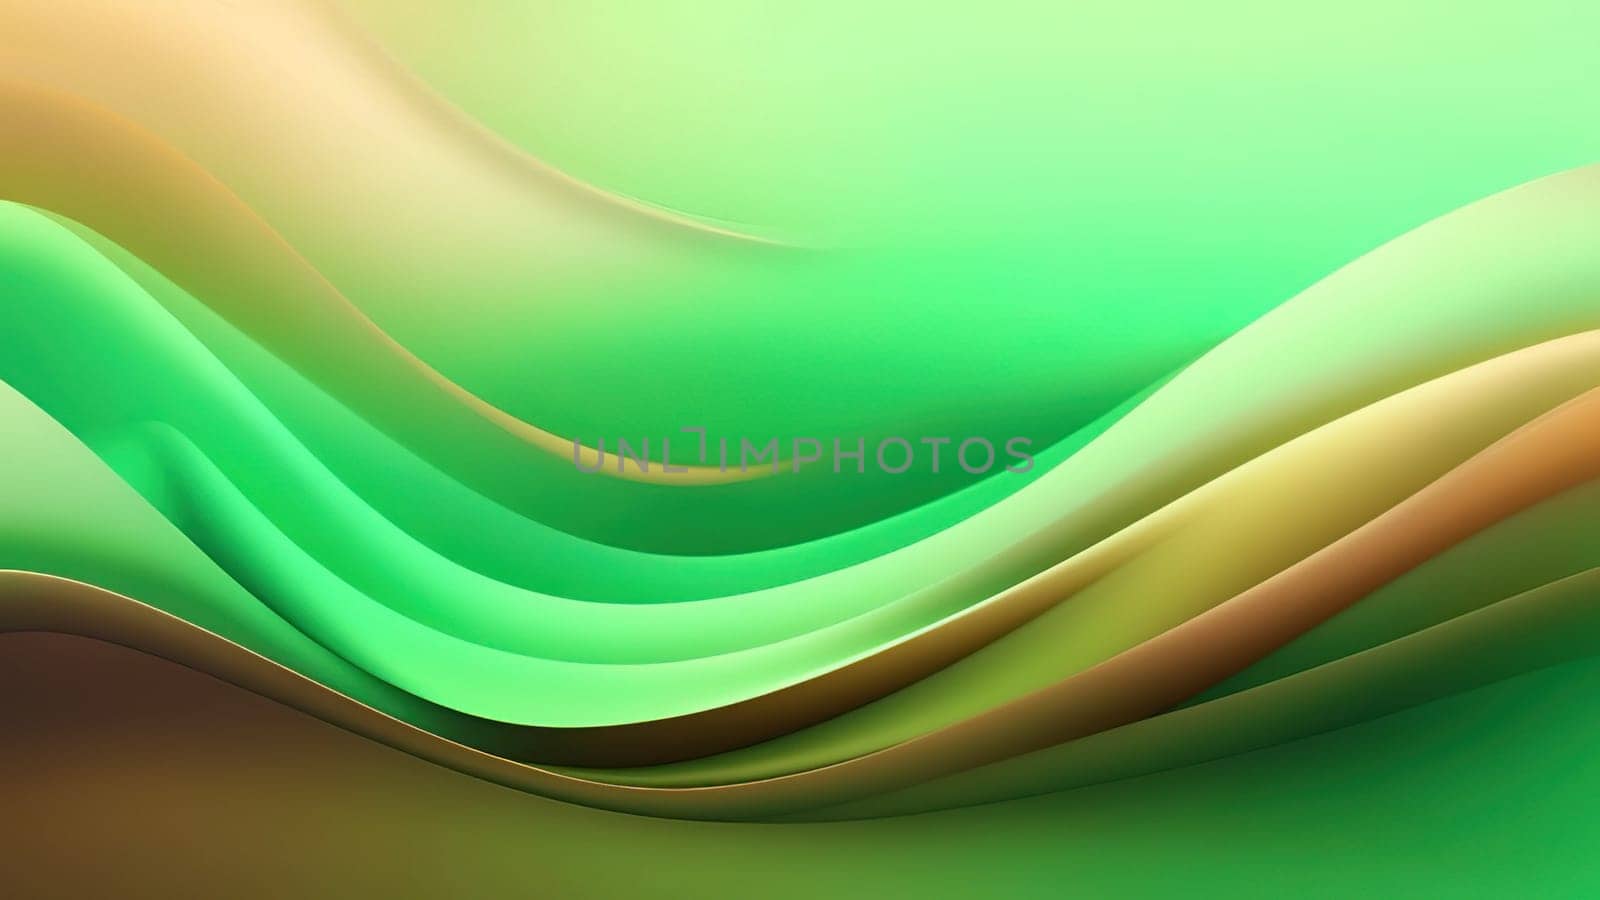 Abstract wavy background. 3d rendering, 3d illustration.abstract background with smooth lines by yilmazsavaskandag